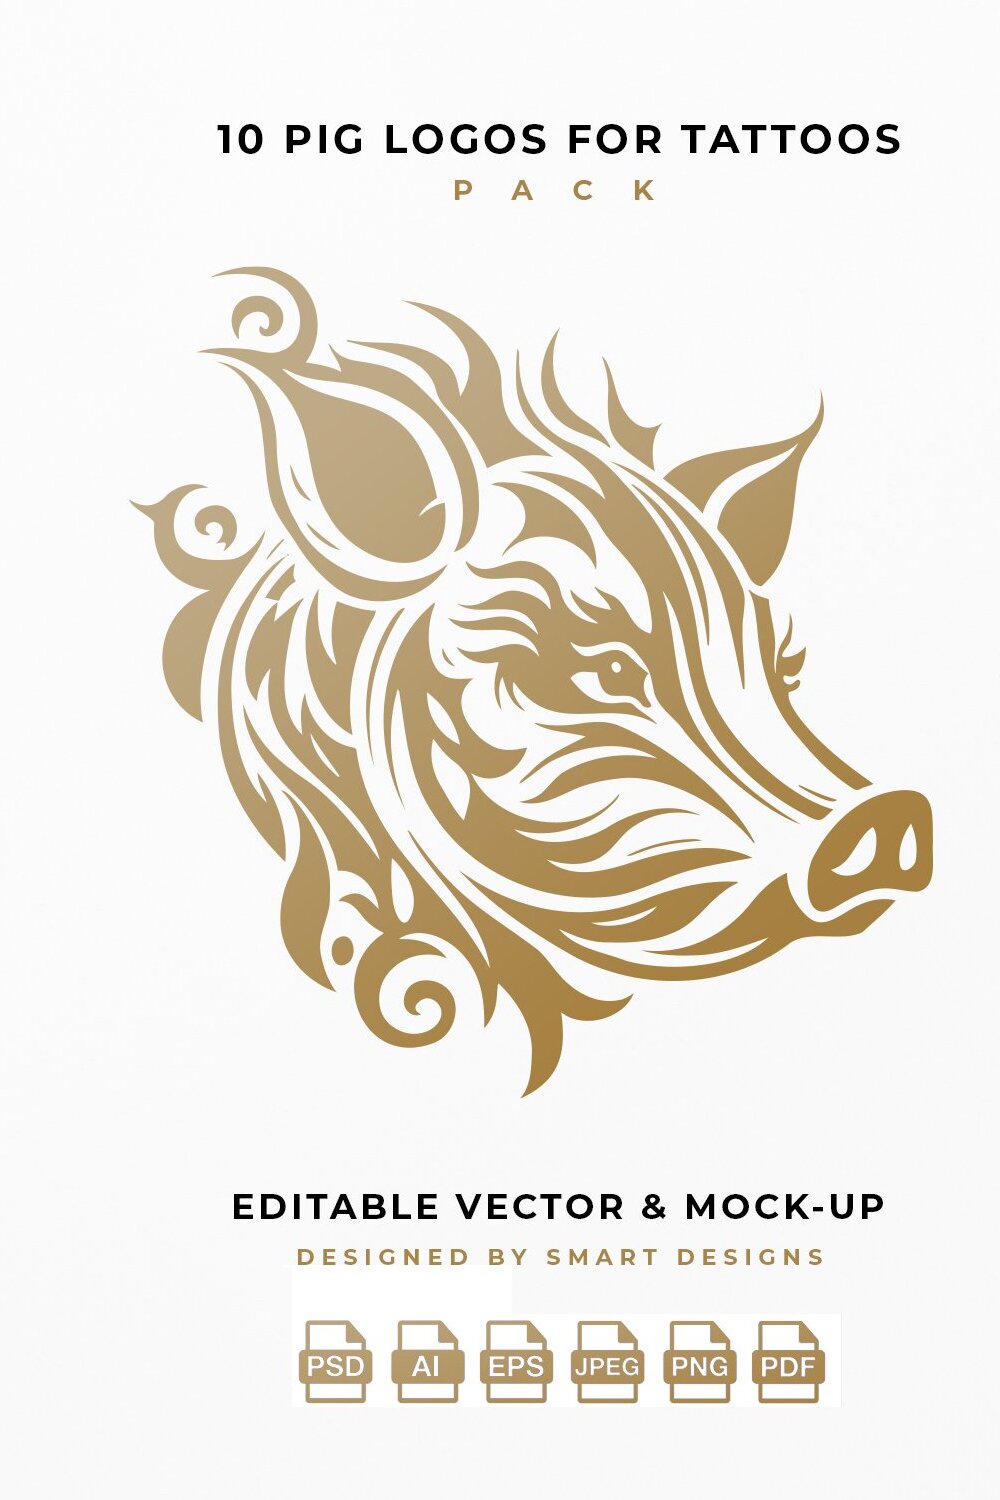 pig logos for tattoos pack x10 2 381